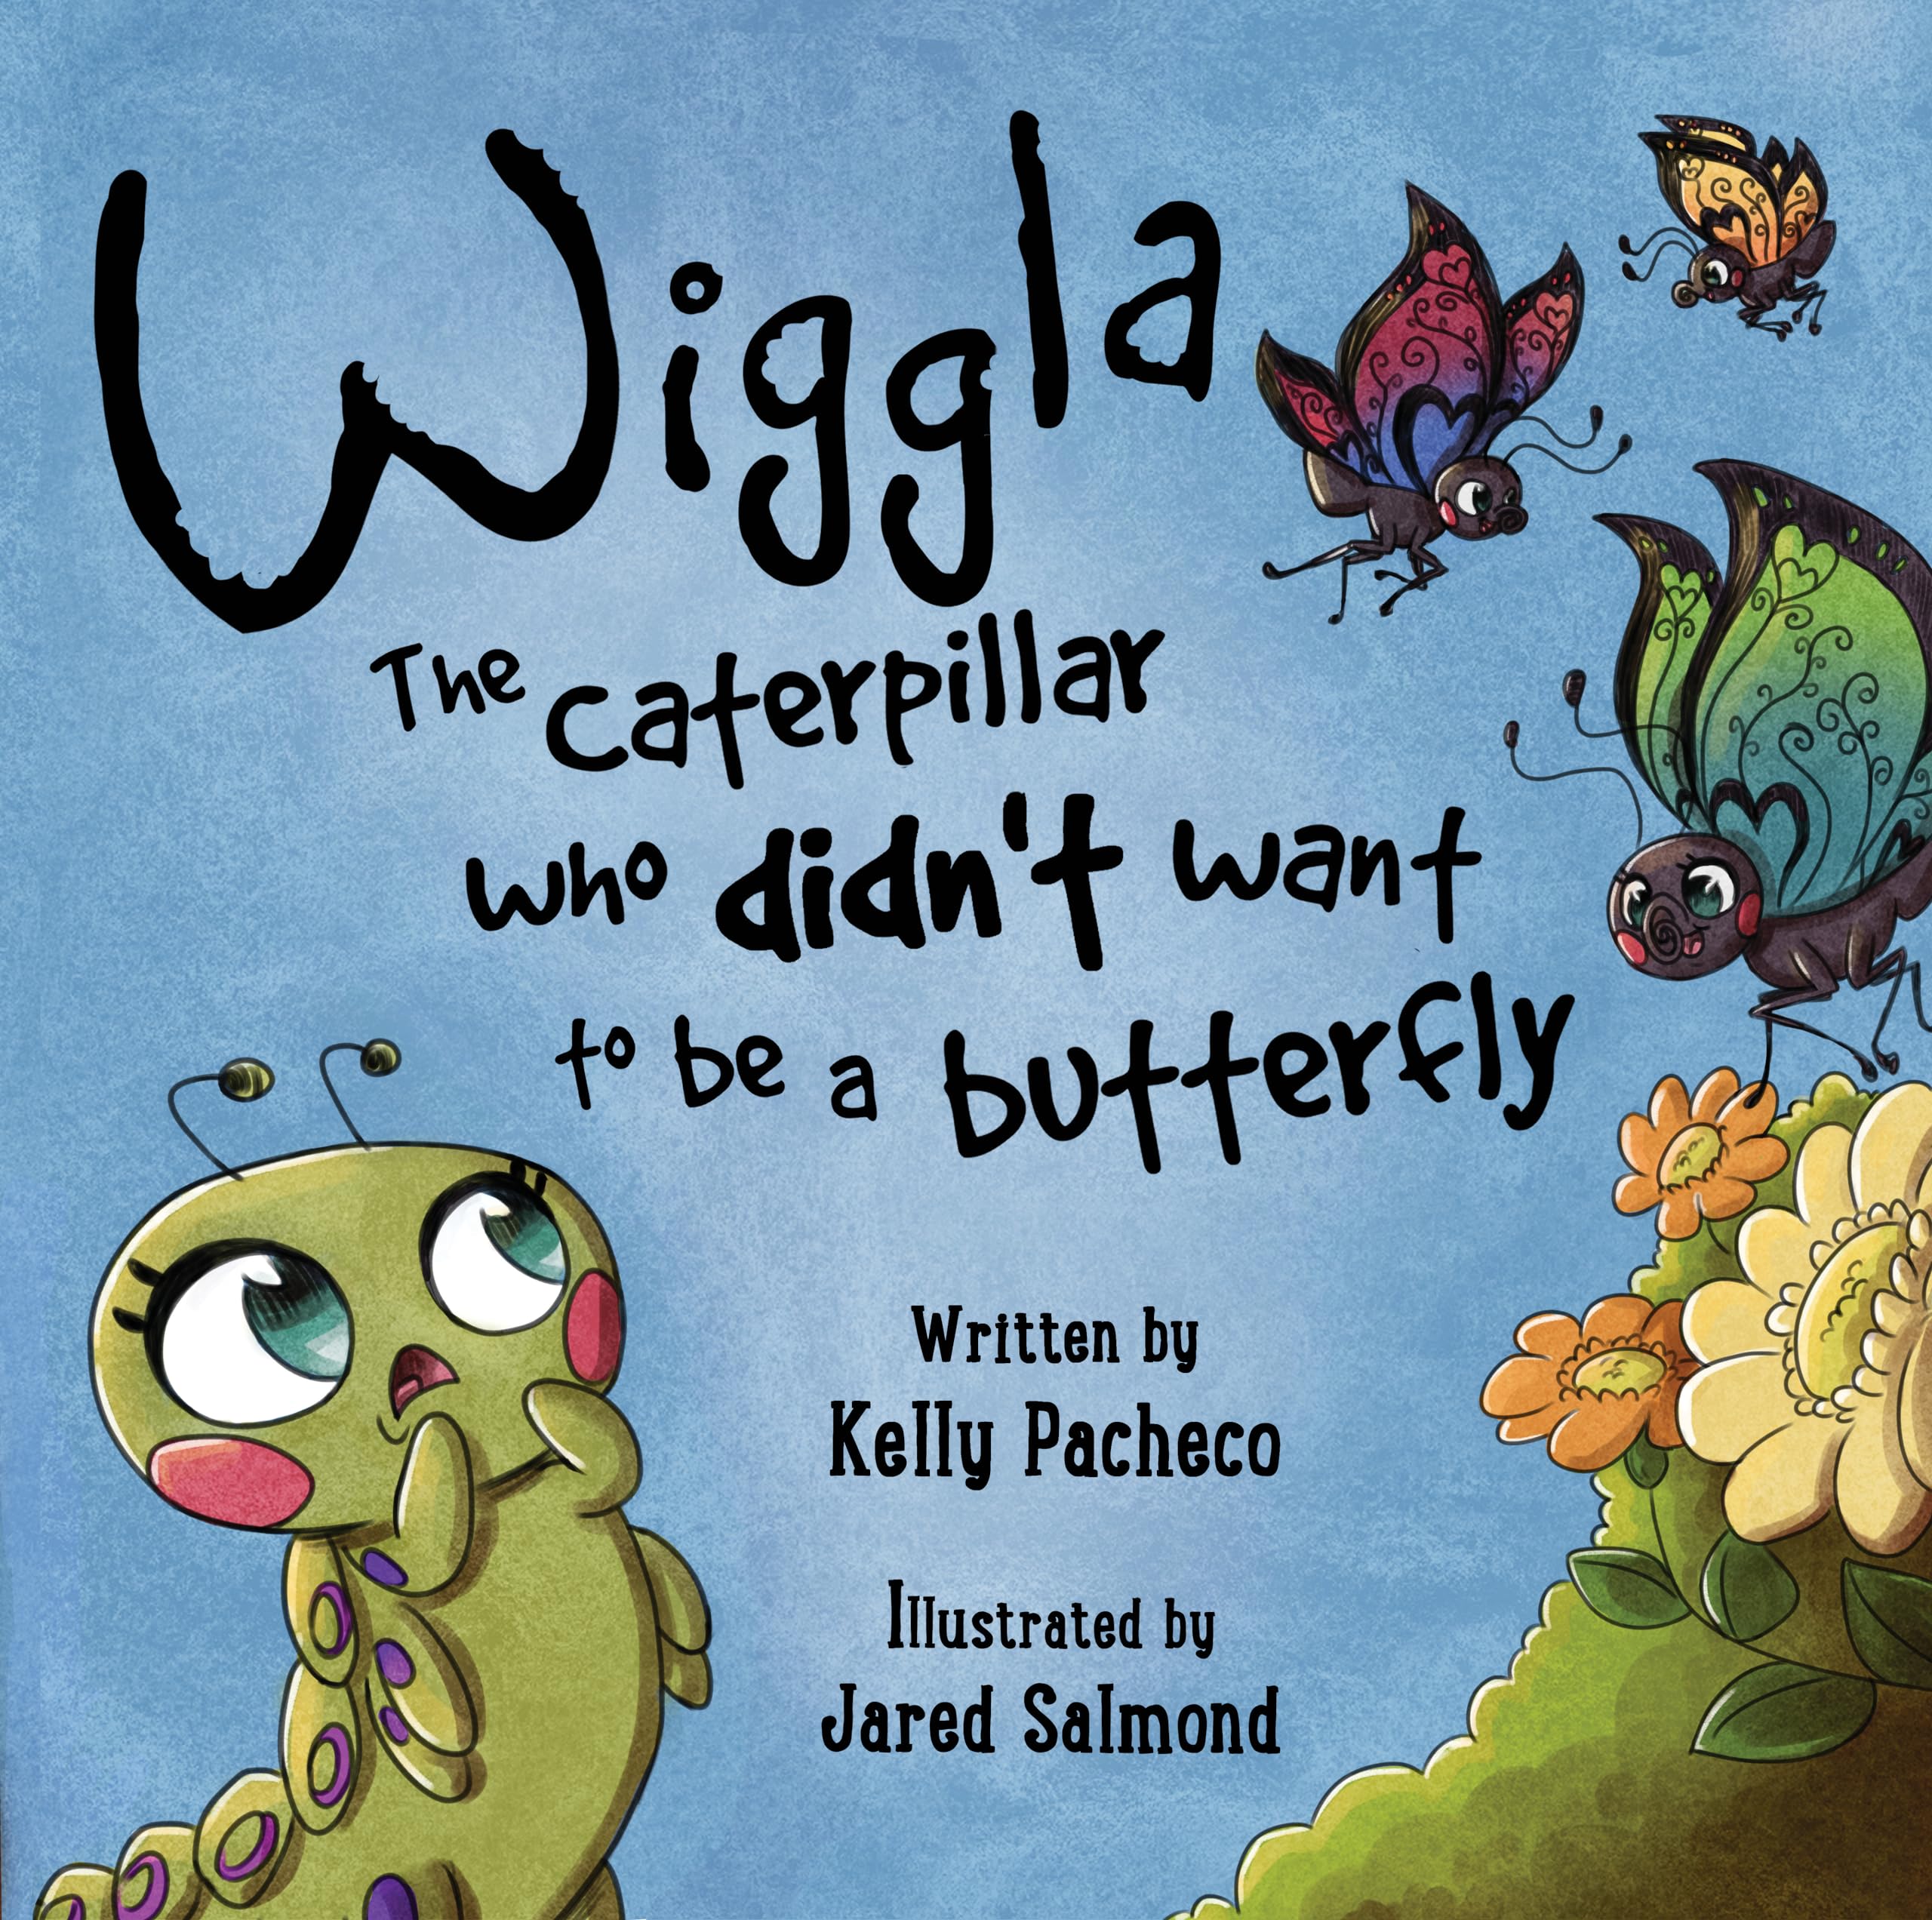 Free Kindle book - Wiggla: The Caterpillar Who Didn’t Want to Be a Butterfly Kindle Edition